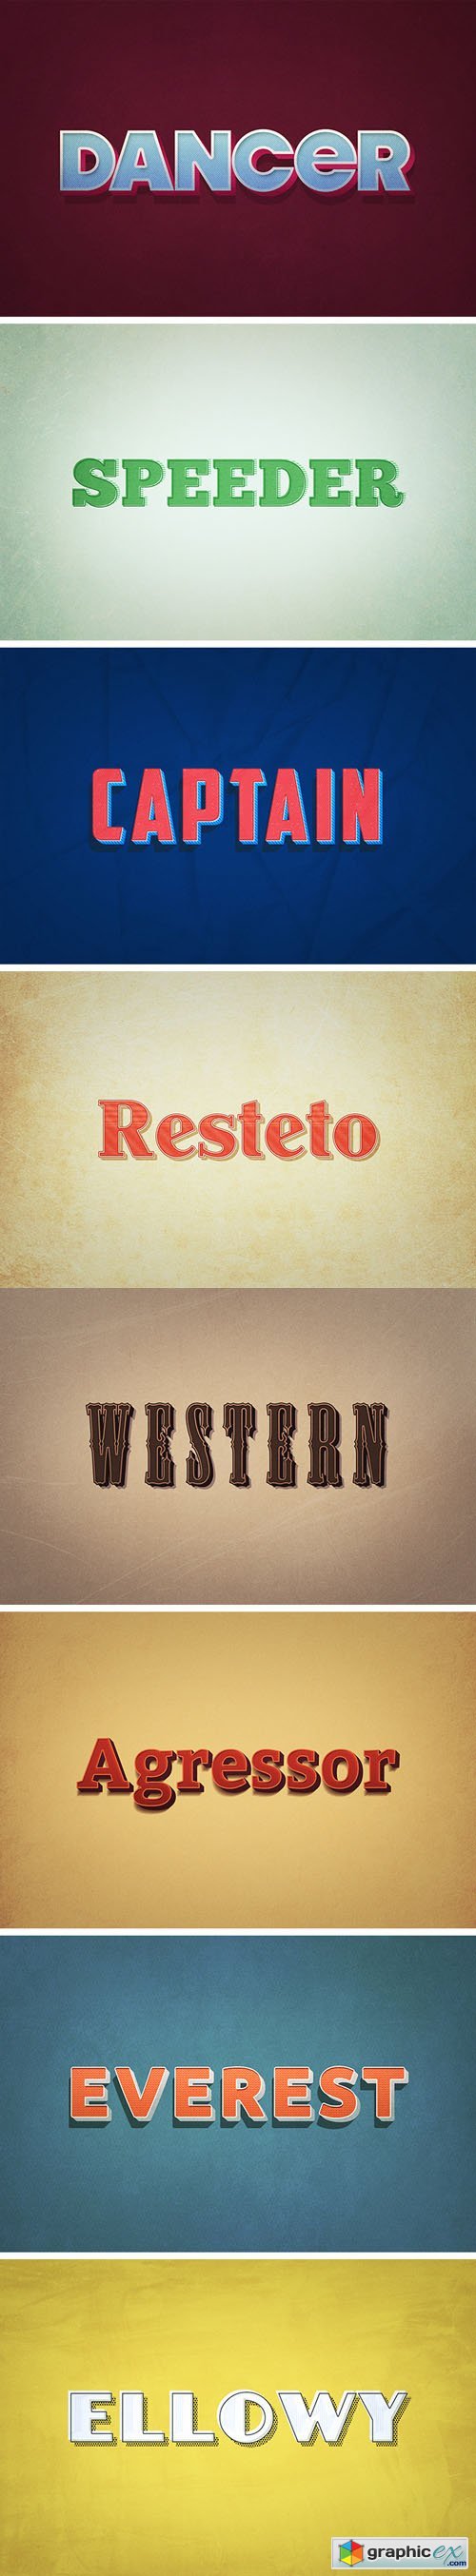 8 Retro Style Text Effects PSD